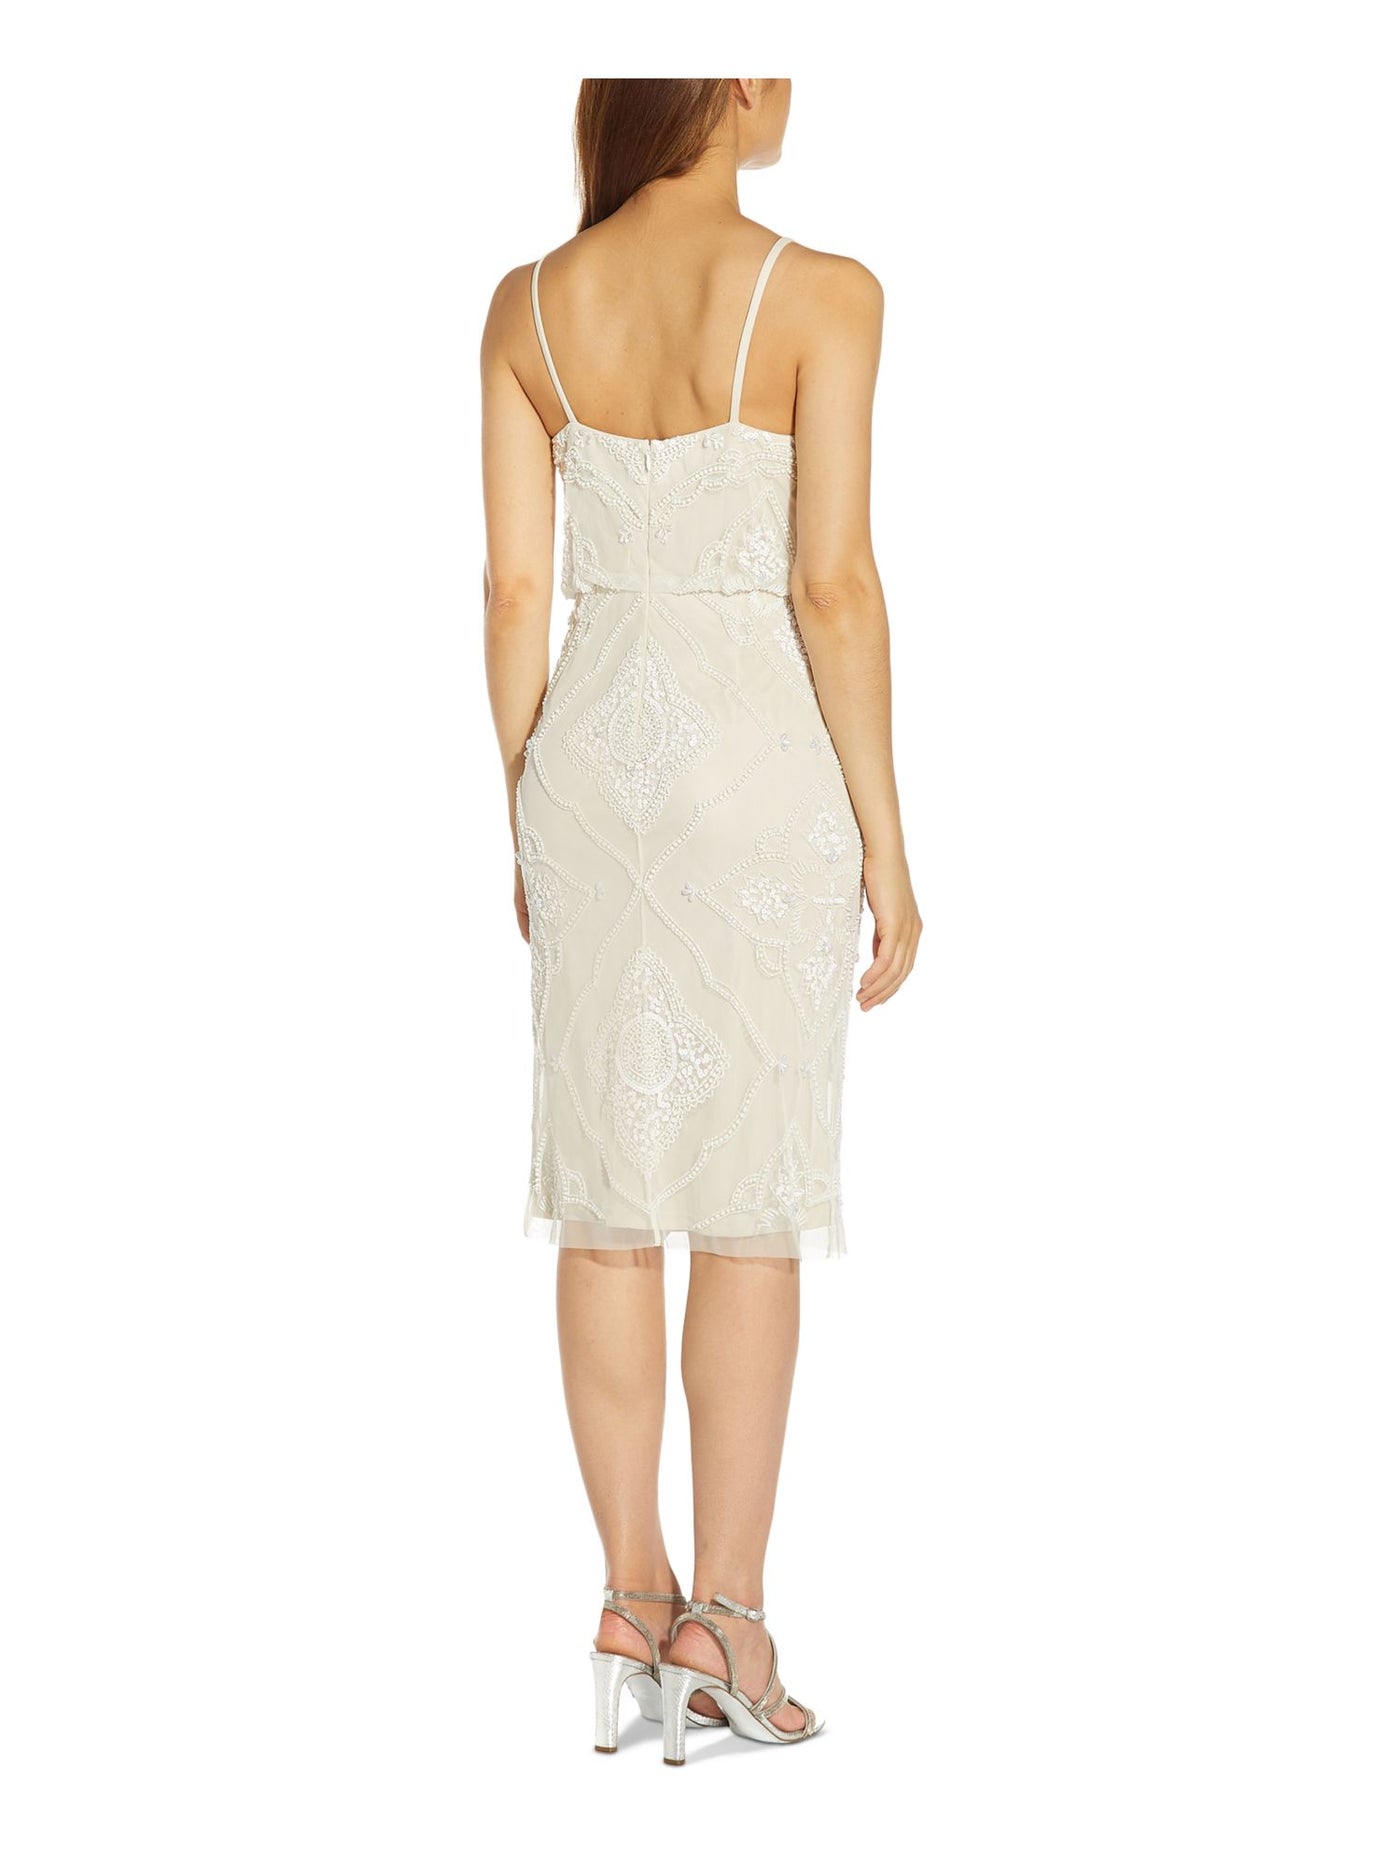 ADRIANNA PAPELL Womens Beige Beaded Zippered Lined Spaghetti Strap V Neck Below The Knee Party Sheath Dress 8